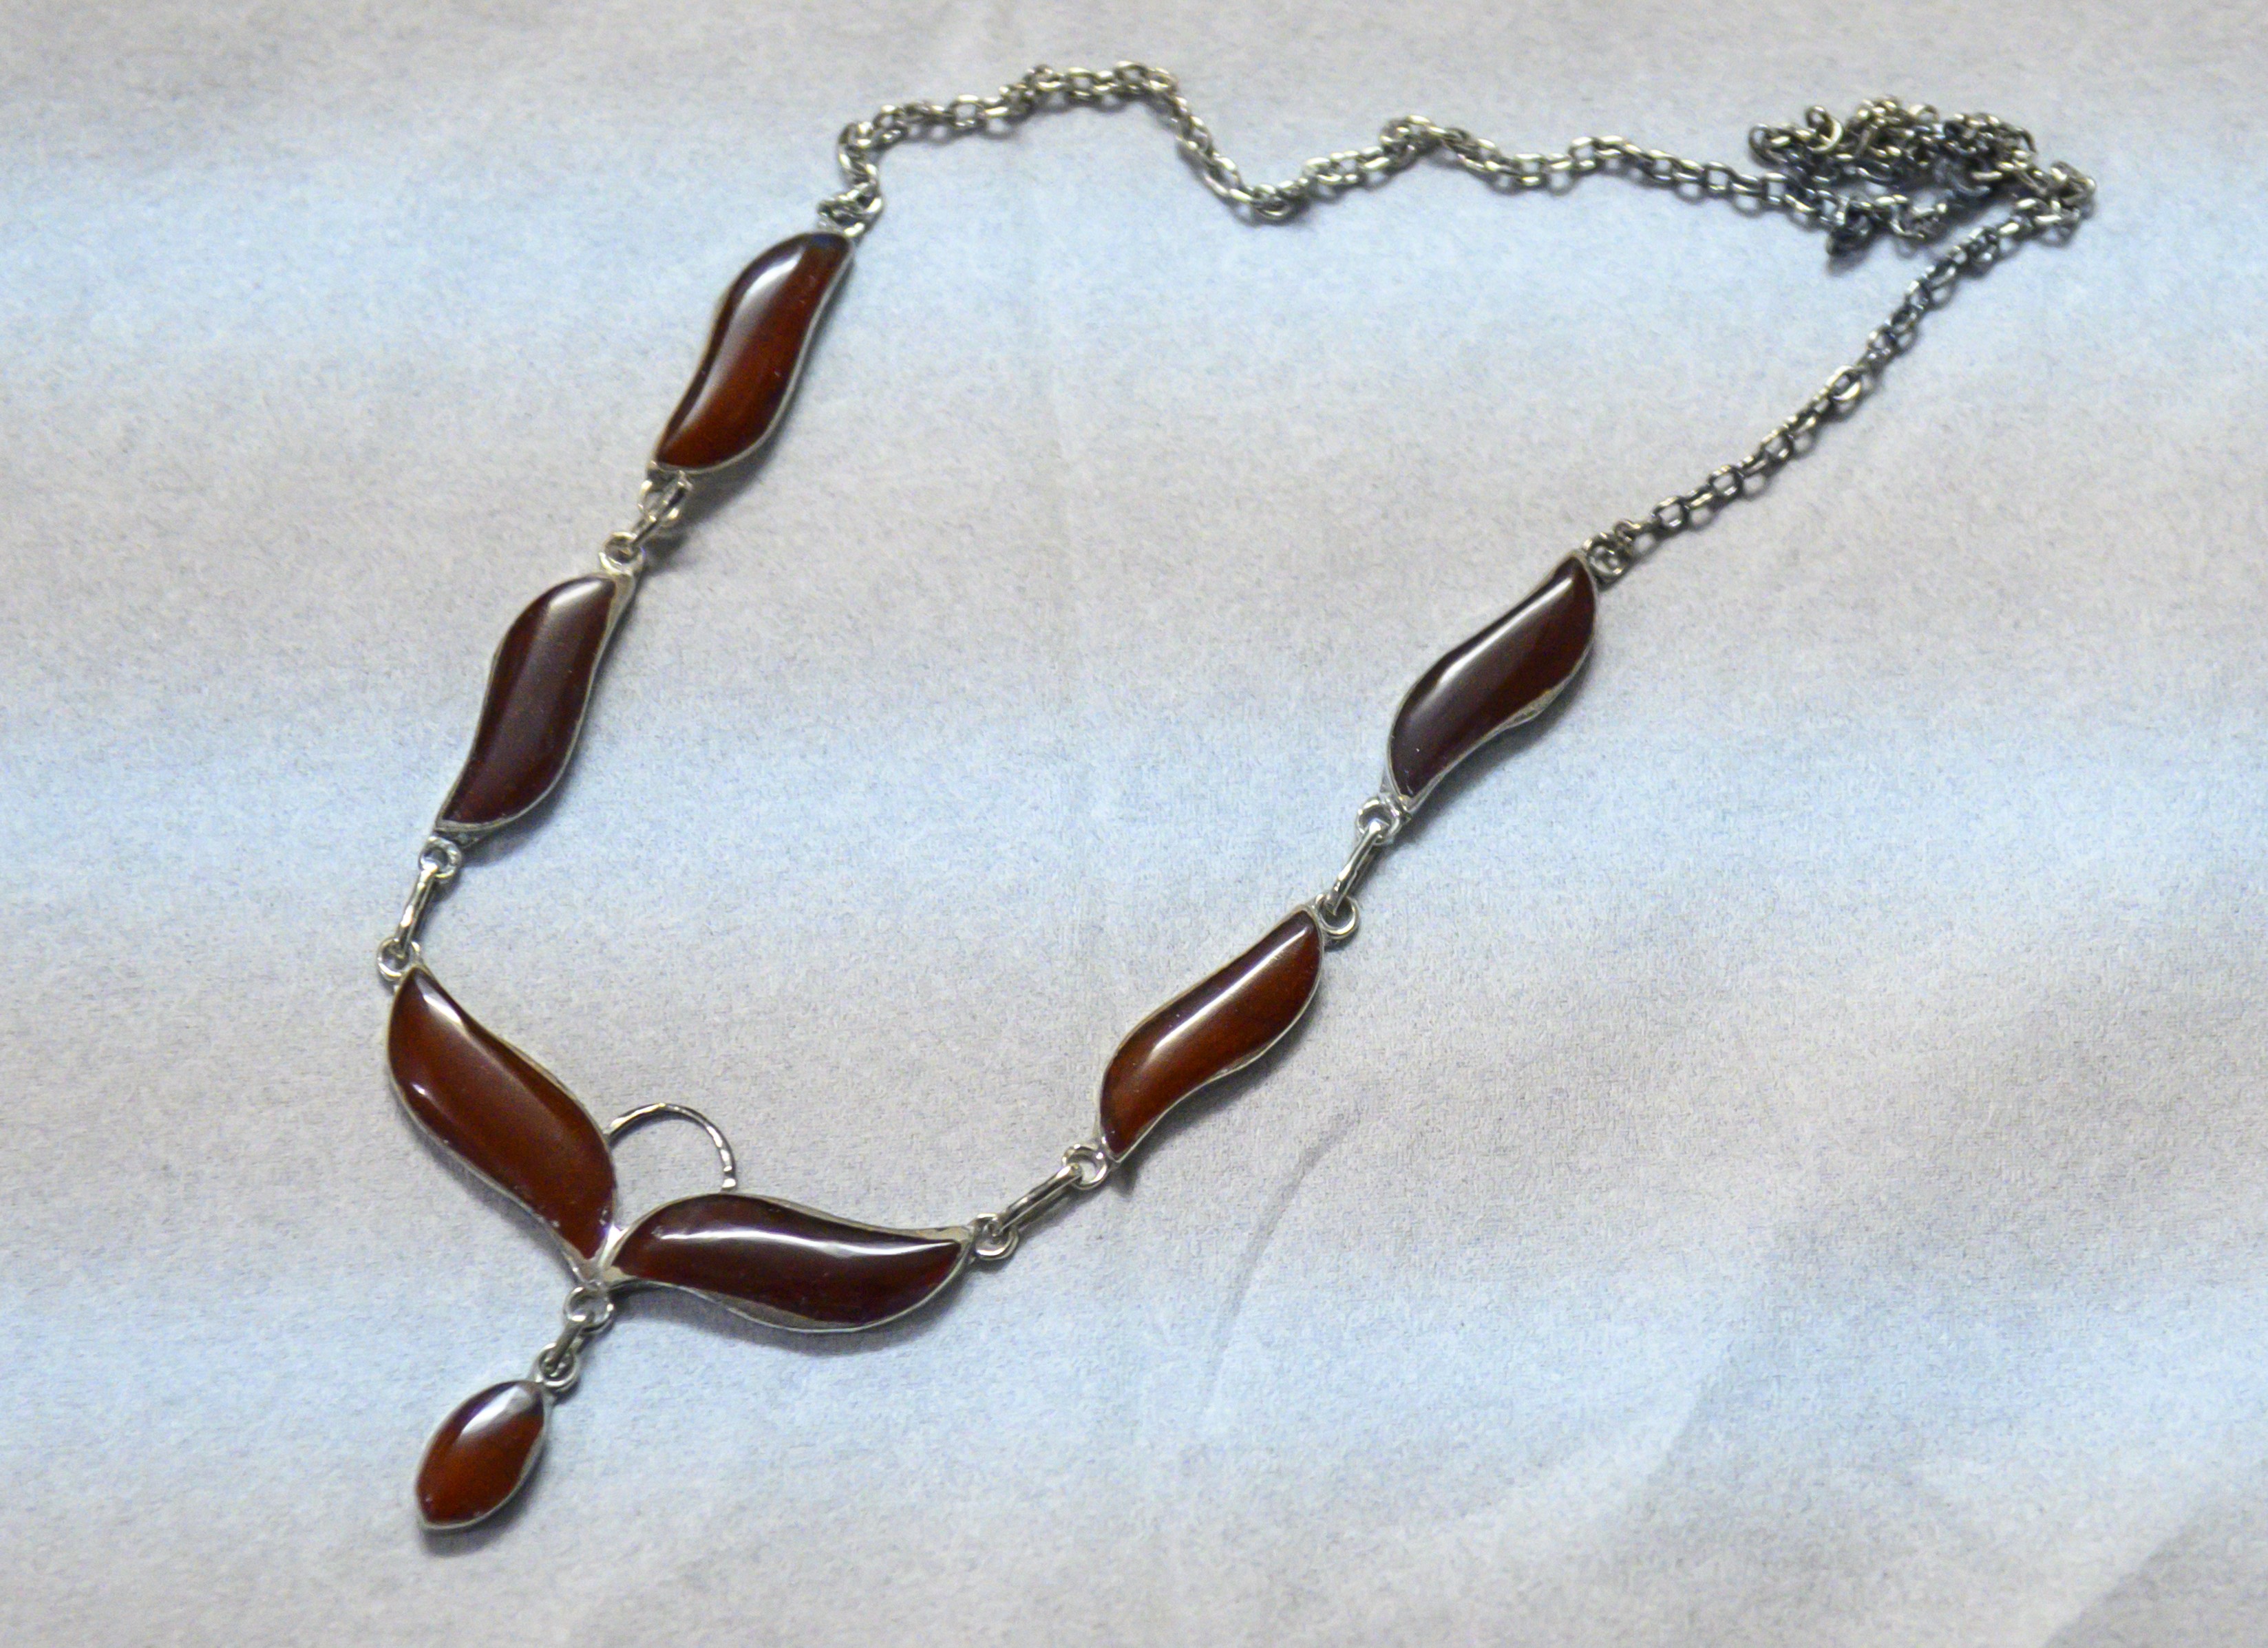 A beautiful agate necklace